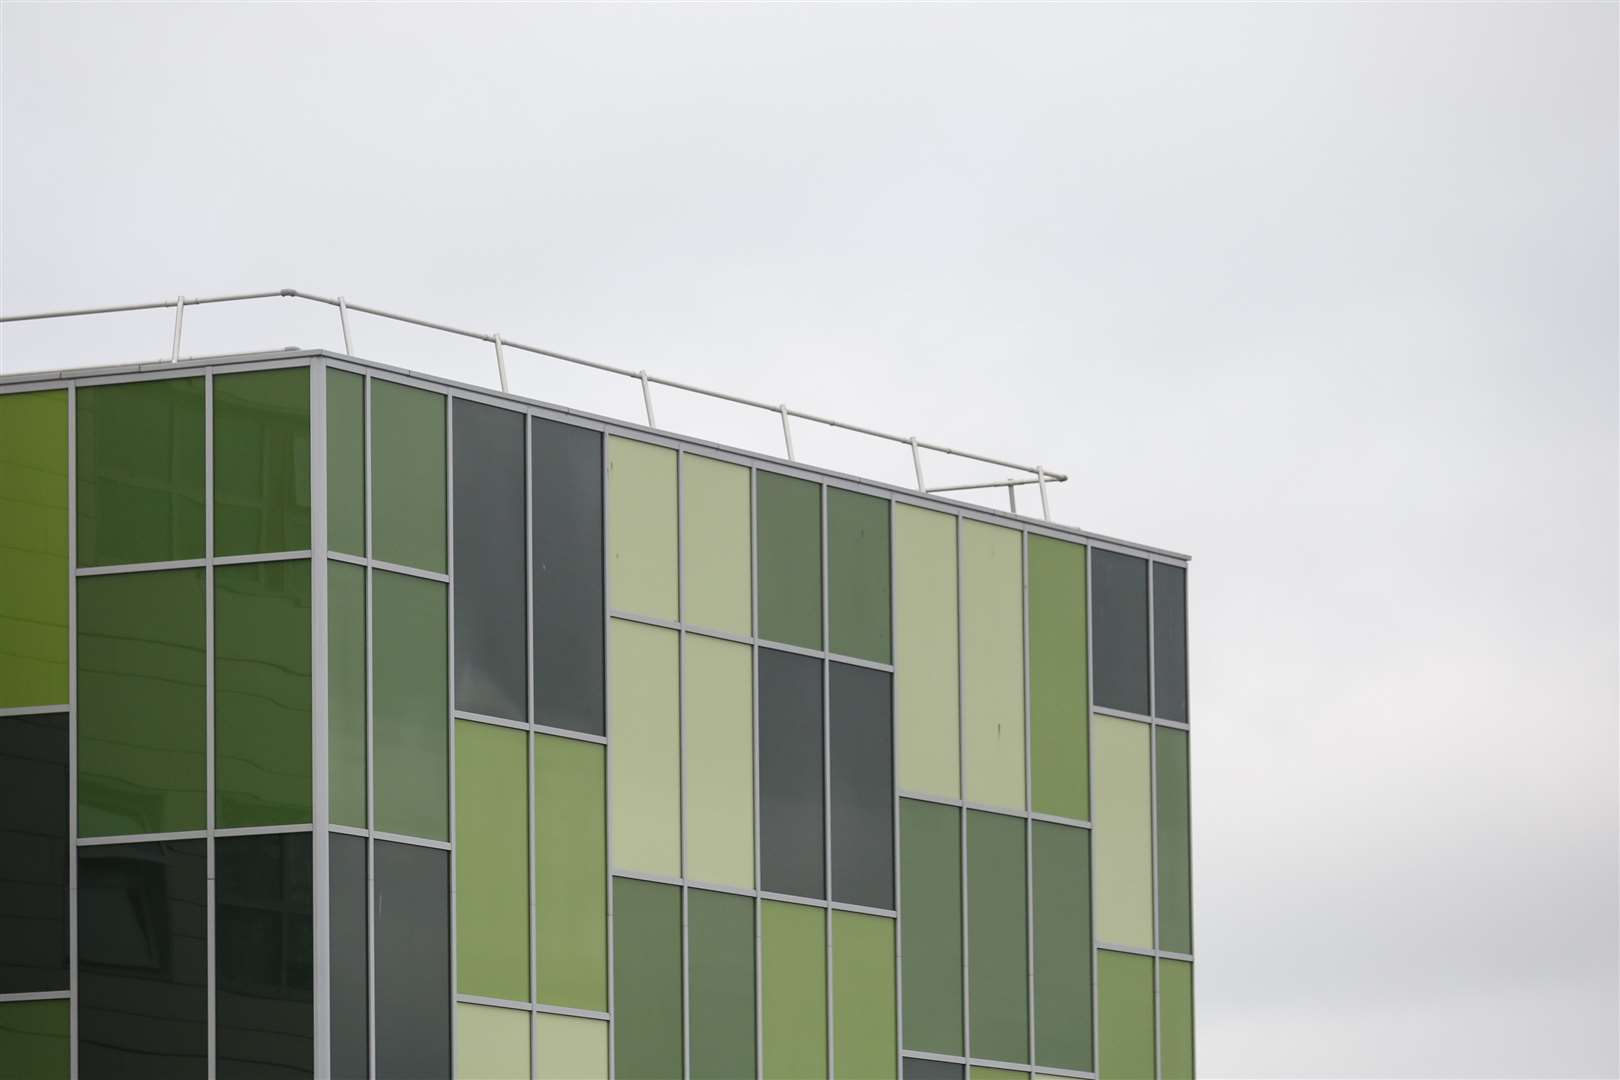 This very green building is also a place of learning